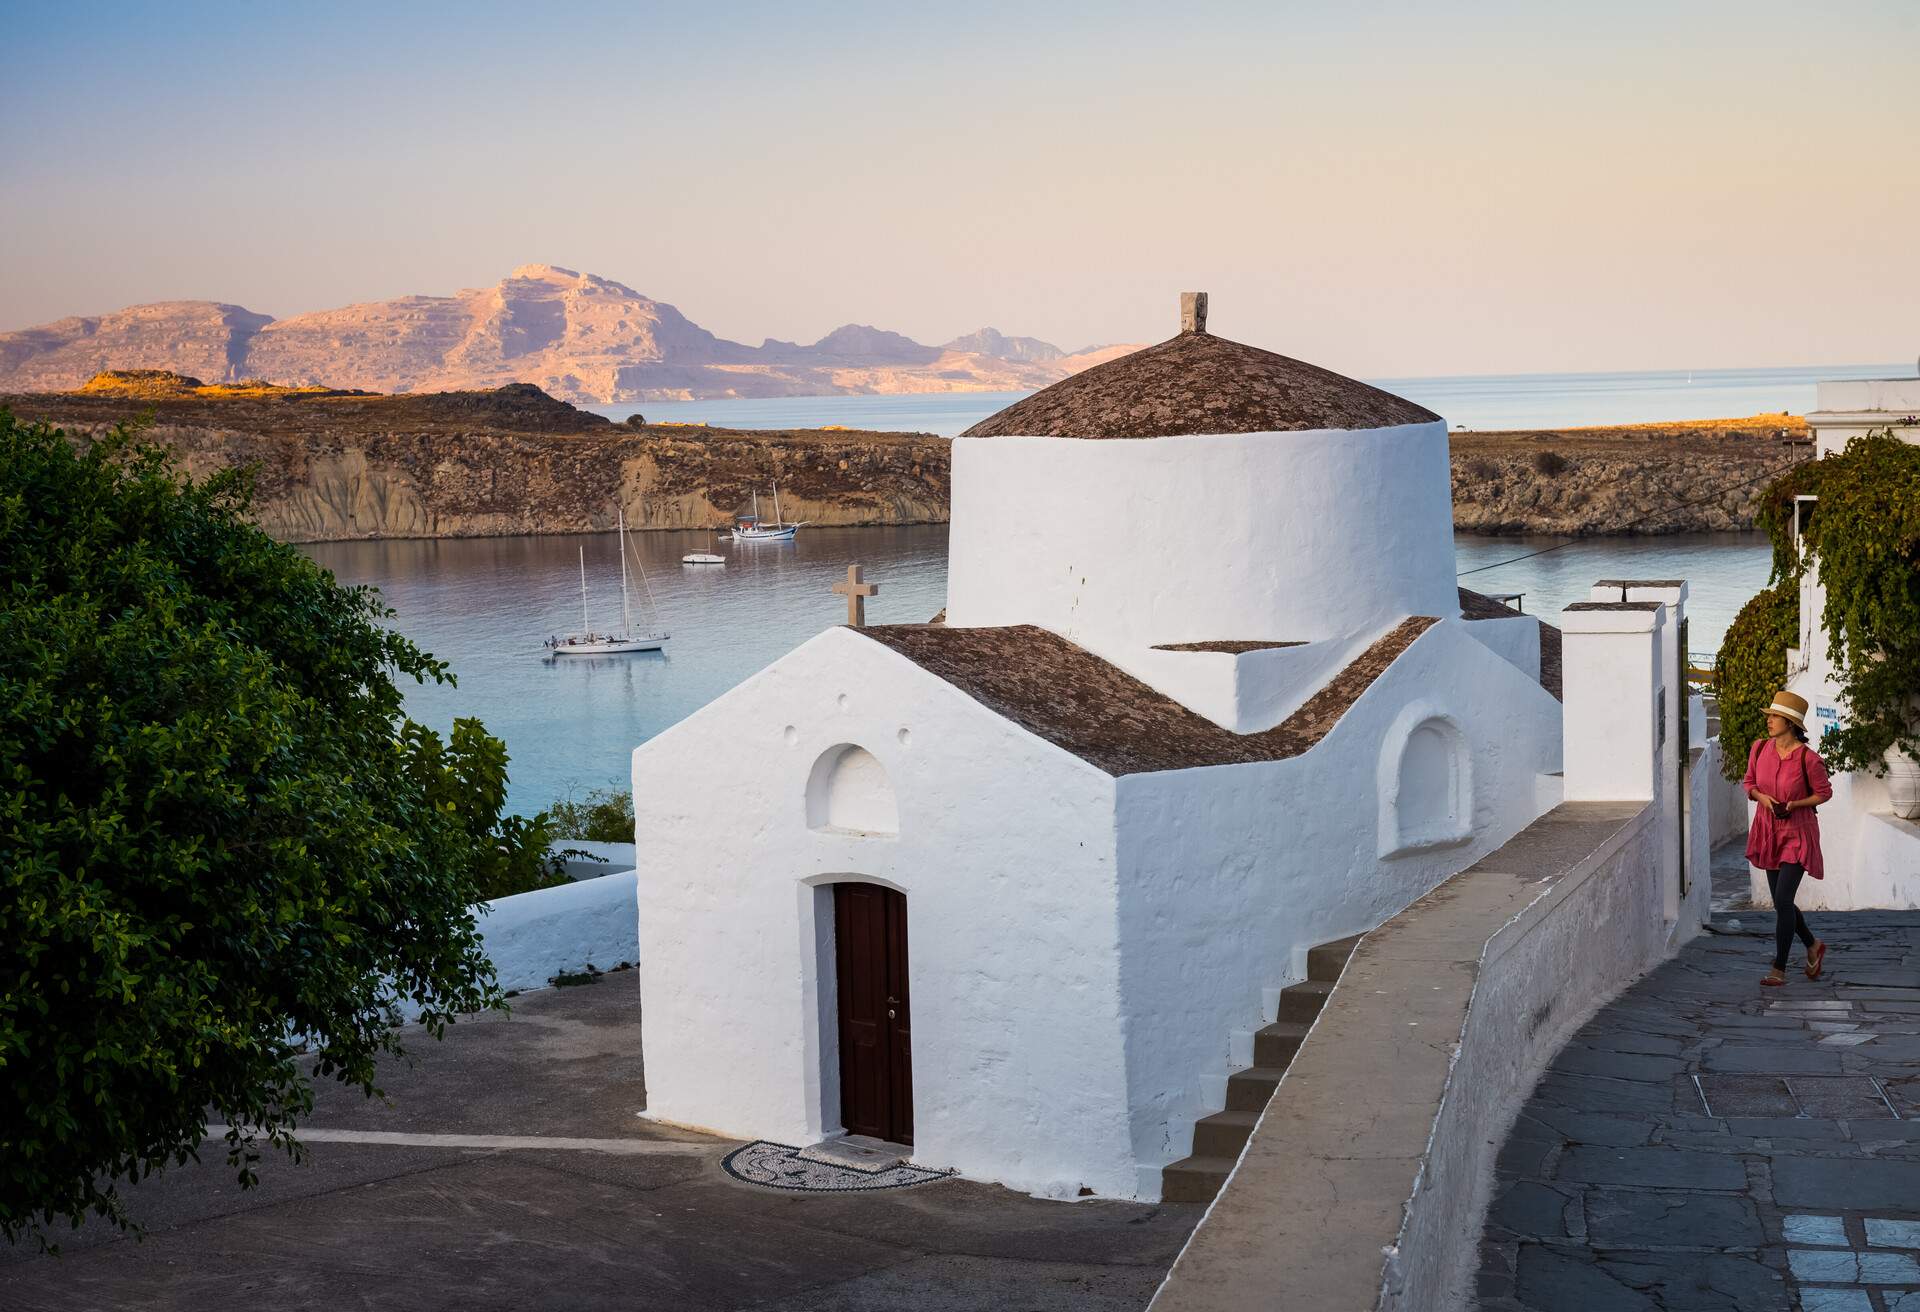 DEST_GREECE_RHODES_St George's Chapel at the Lindos_GettyImages-626229698